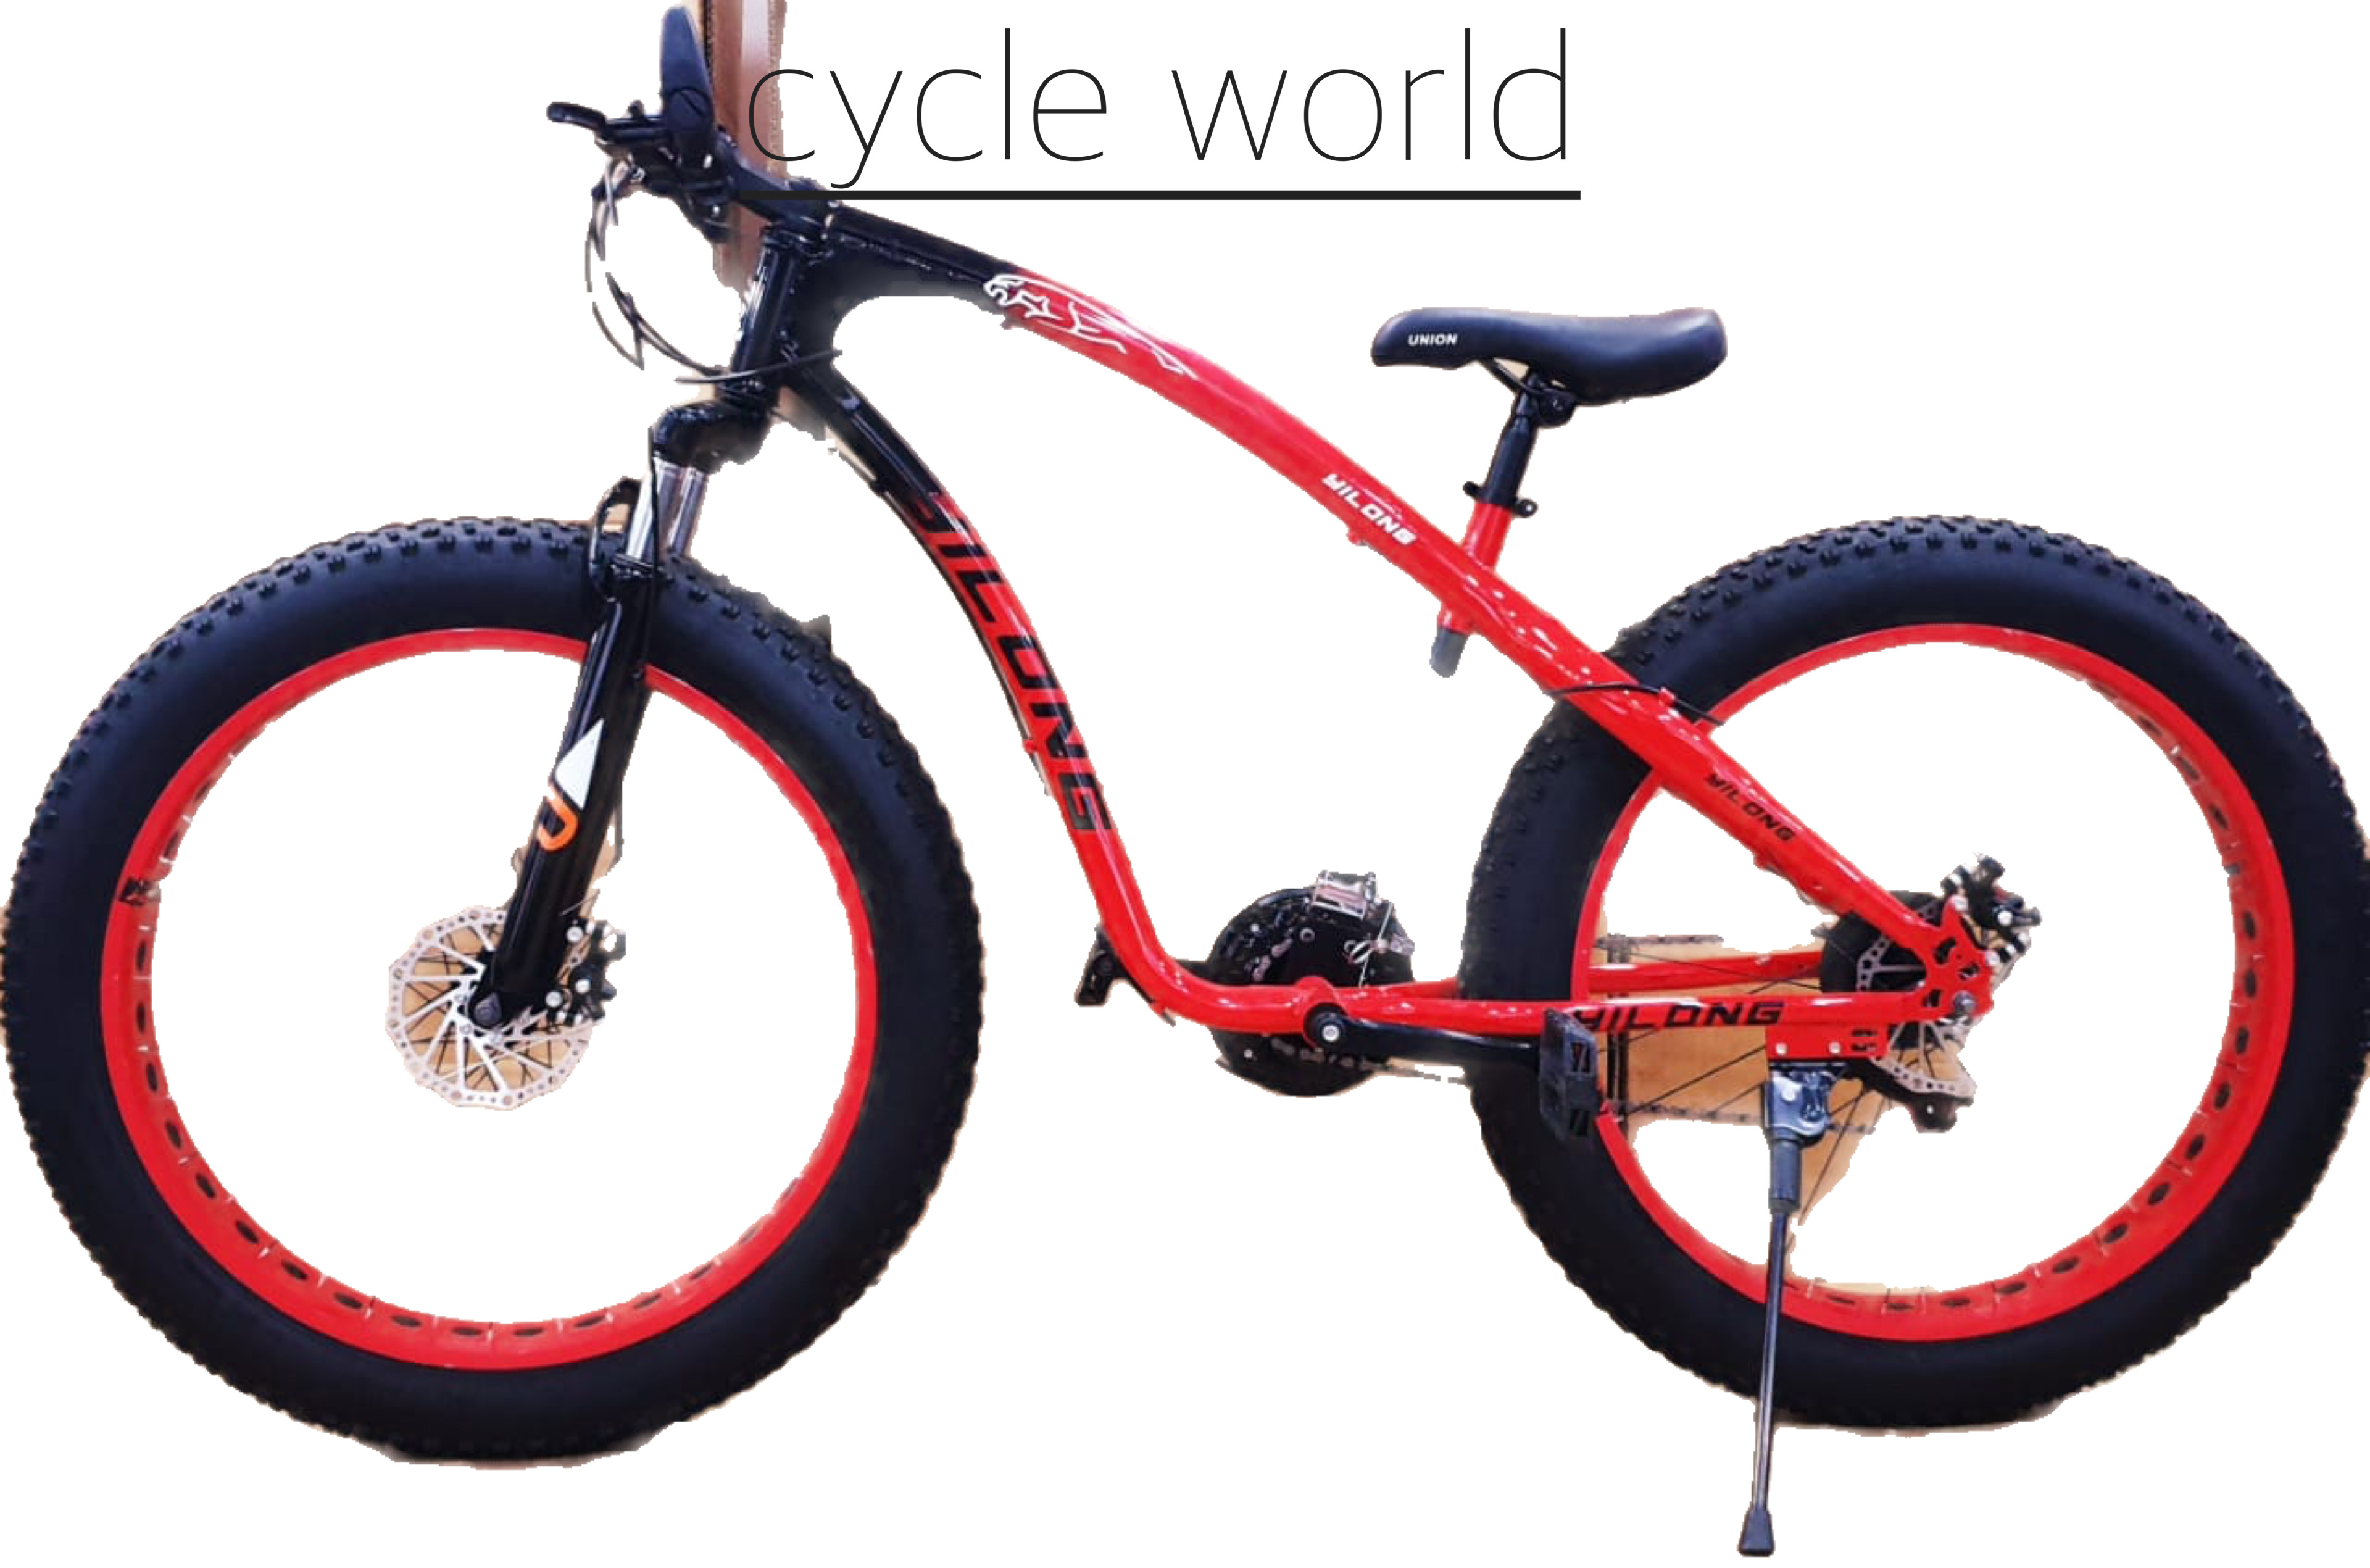 Fat Tyre Cycle dealers In Chandigarh | AVERY FREEWHEEL (P) LTD. | Fat Tyre Cycle retailers In Chandigarh, Fat Tyre Cycle manufacturers In Chandigarh, Fat Tyre Cycle suppliers In Chandigarh, Fat Tyre Cycle wholesalers In Chandigarh, Fat Tyre Cycle sellers - GL64896